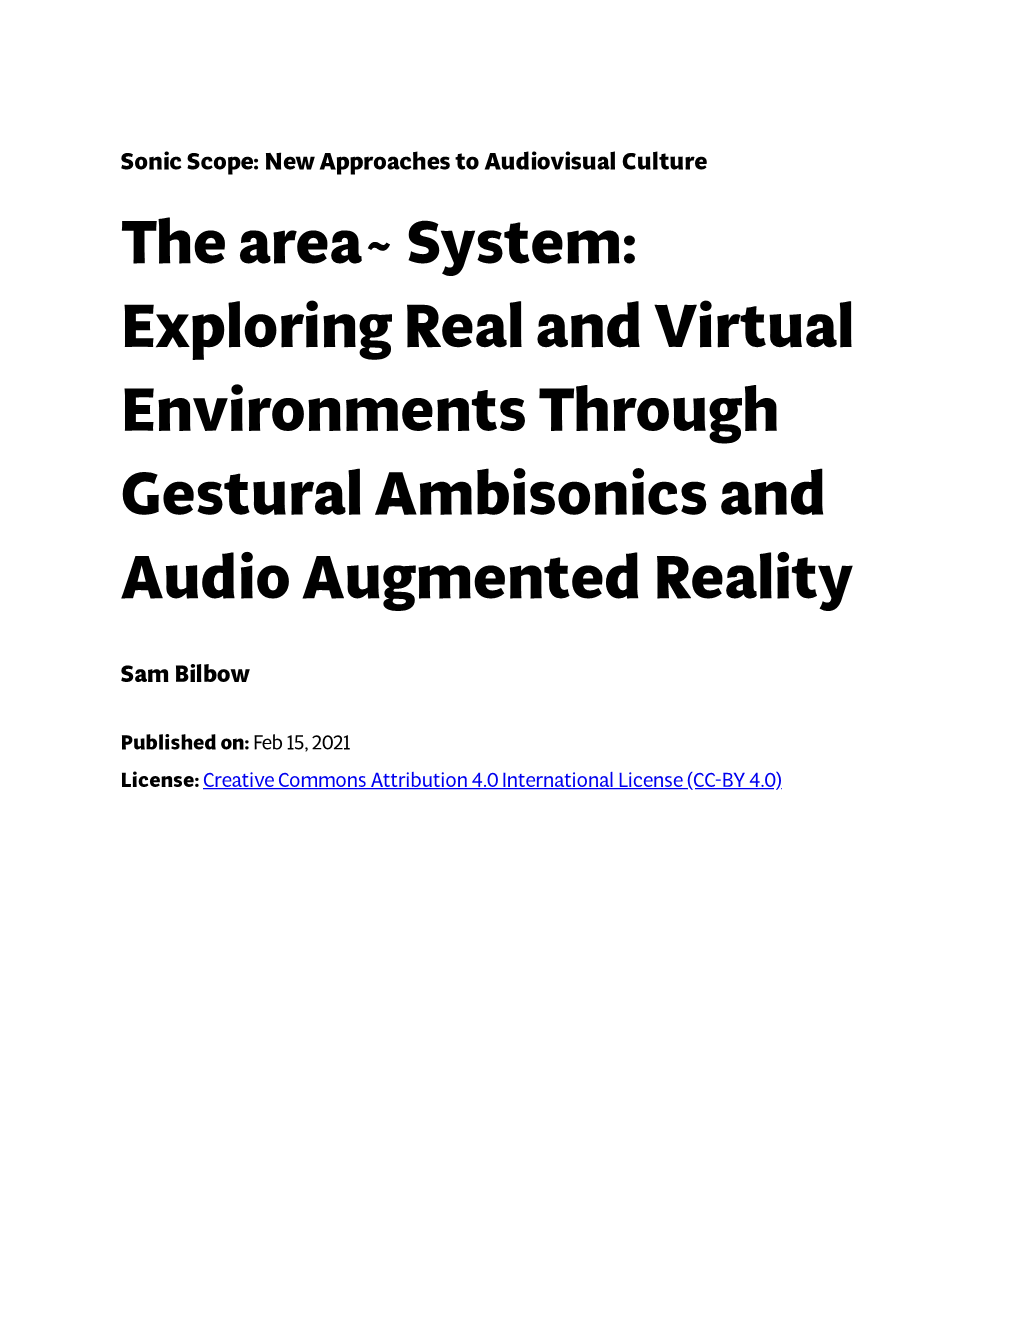 Exploring Real and Virtual Environments Through Gestural Ambisonics and Audio Augmented Reality